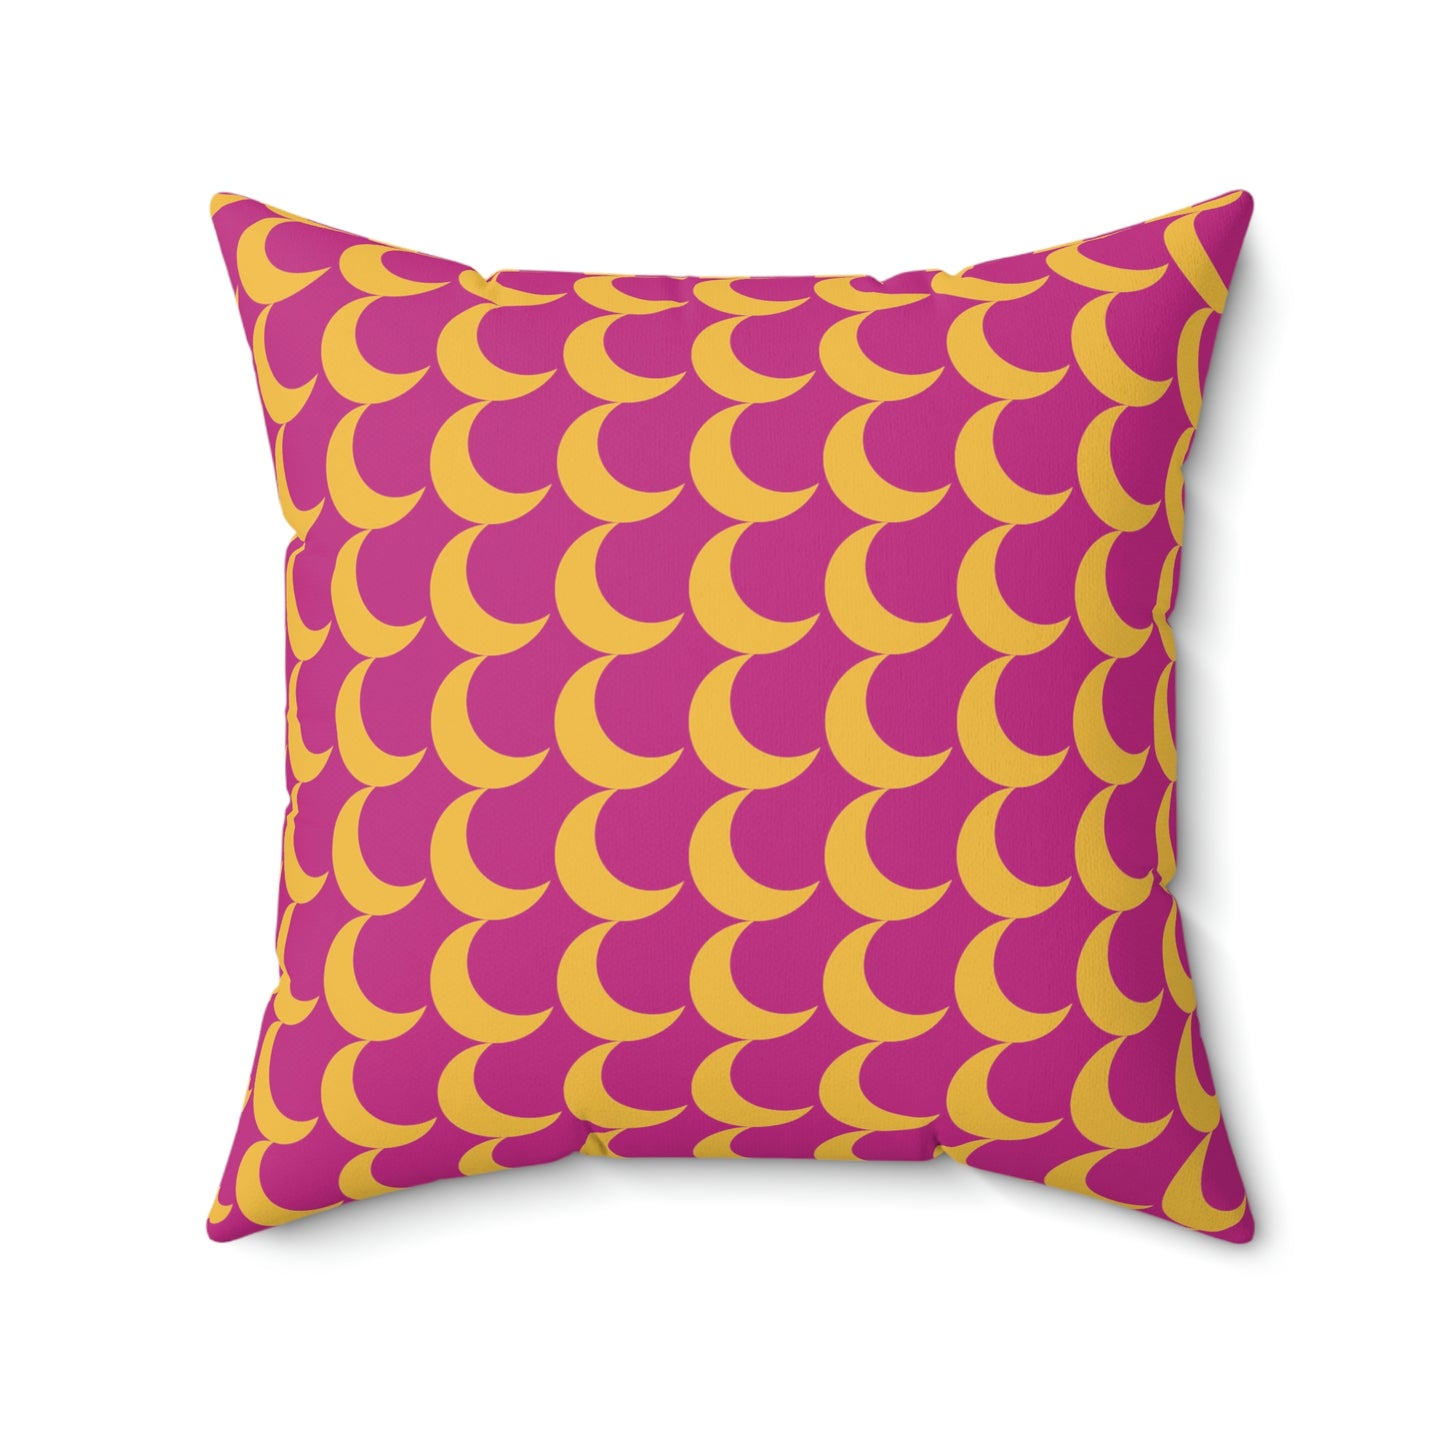 Spun Polyester Square Pillow Case “Crescent Moon on Pink”